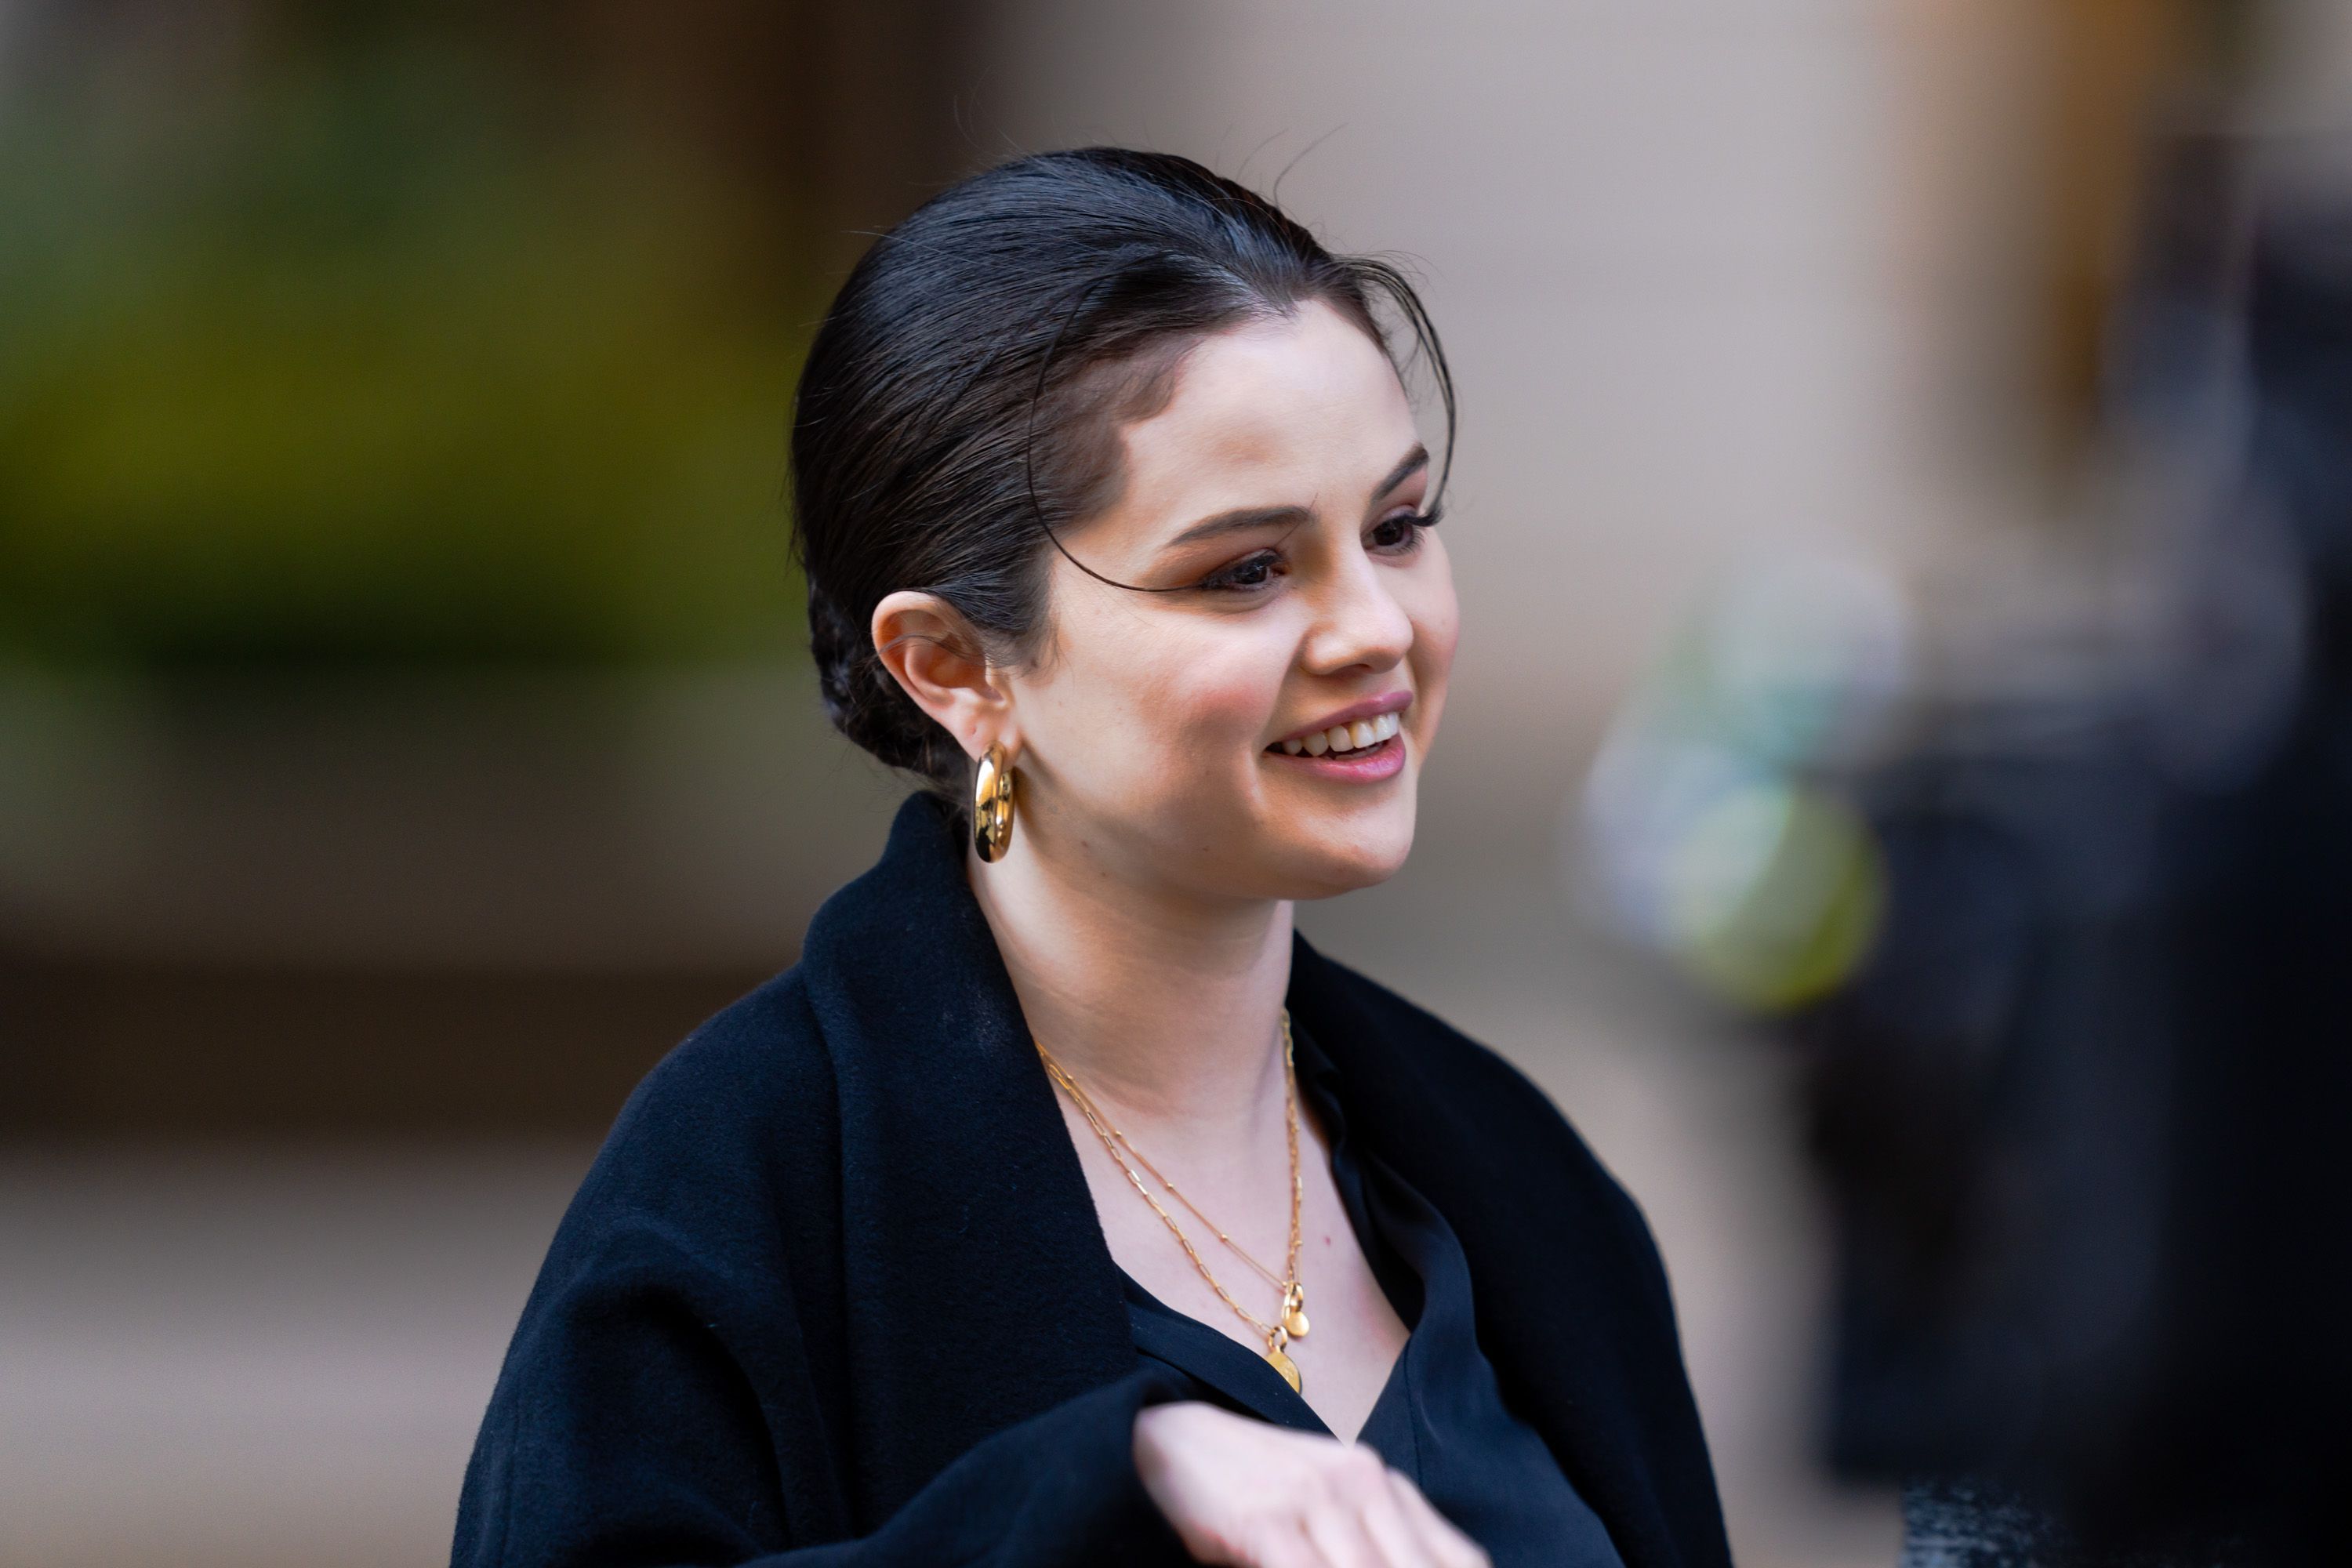 Selena Gomez smiles on set for 'Only Murders in the Building' in the Upper West Side in New York City